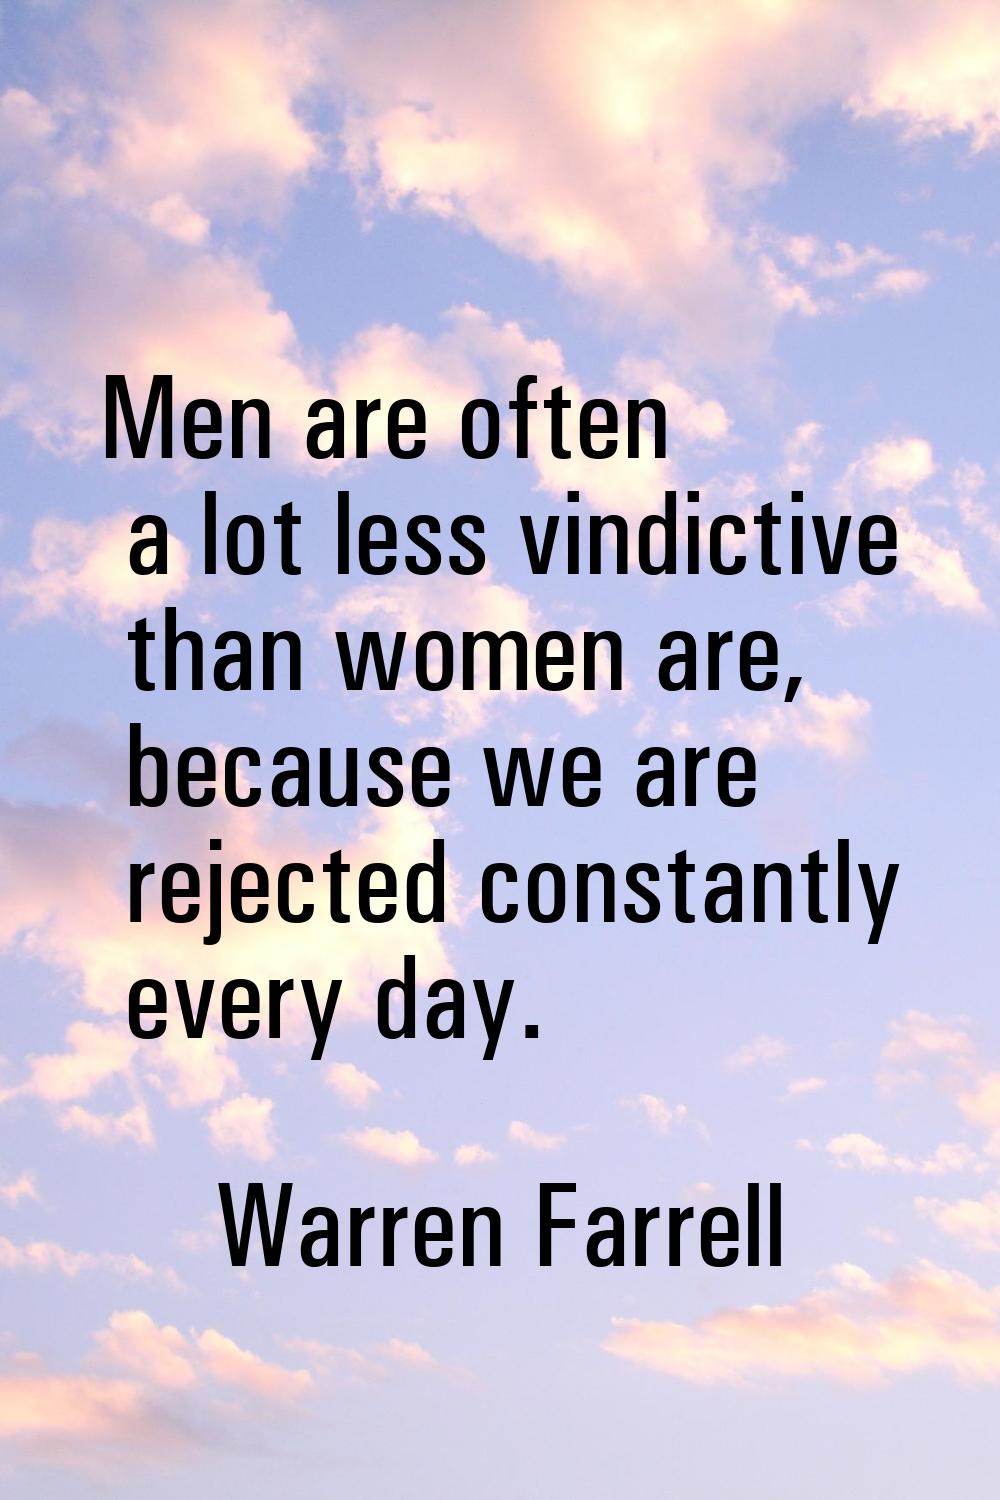 Men are often a lot less vindictive than women are, because we are rejected constantly every day.